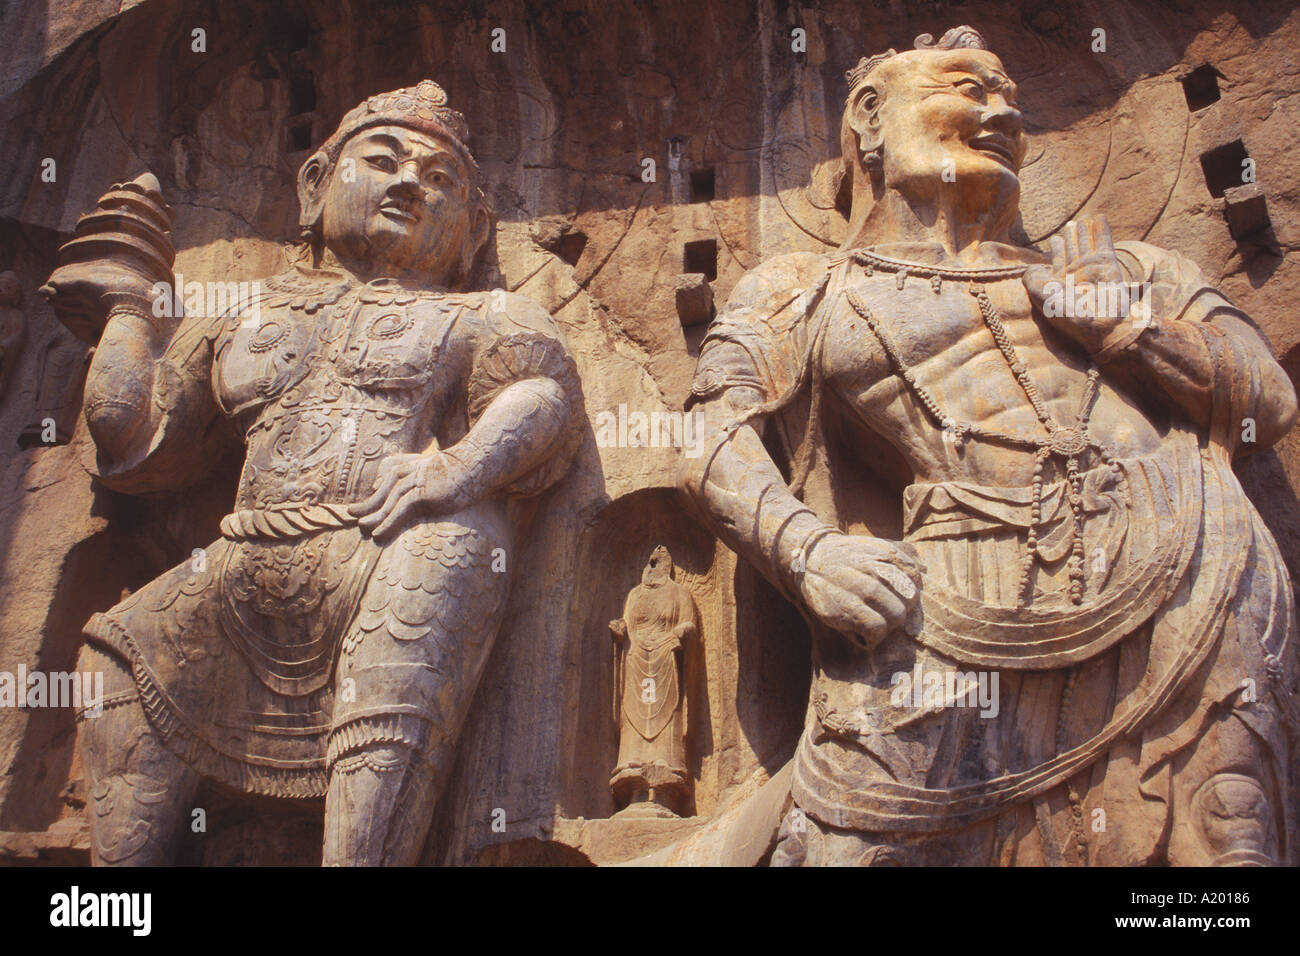 Statues carved in the rock at the Longman Buddhist caves at Luoyang Hunan Province China J Sweeney Stock Photo